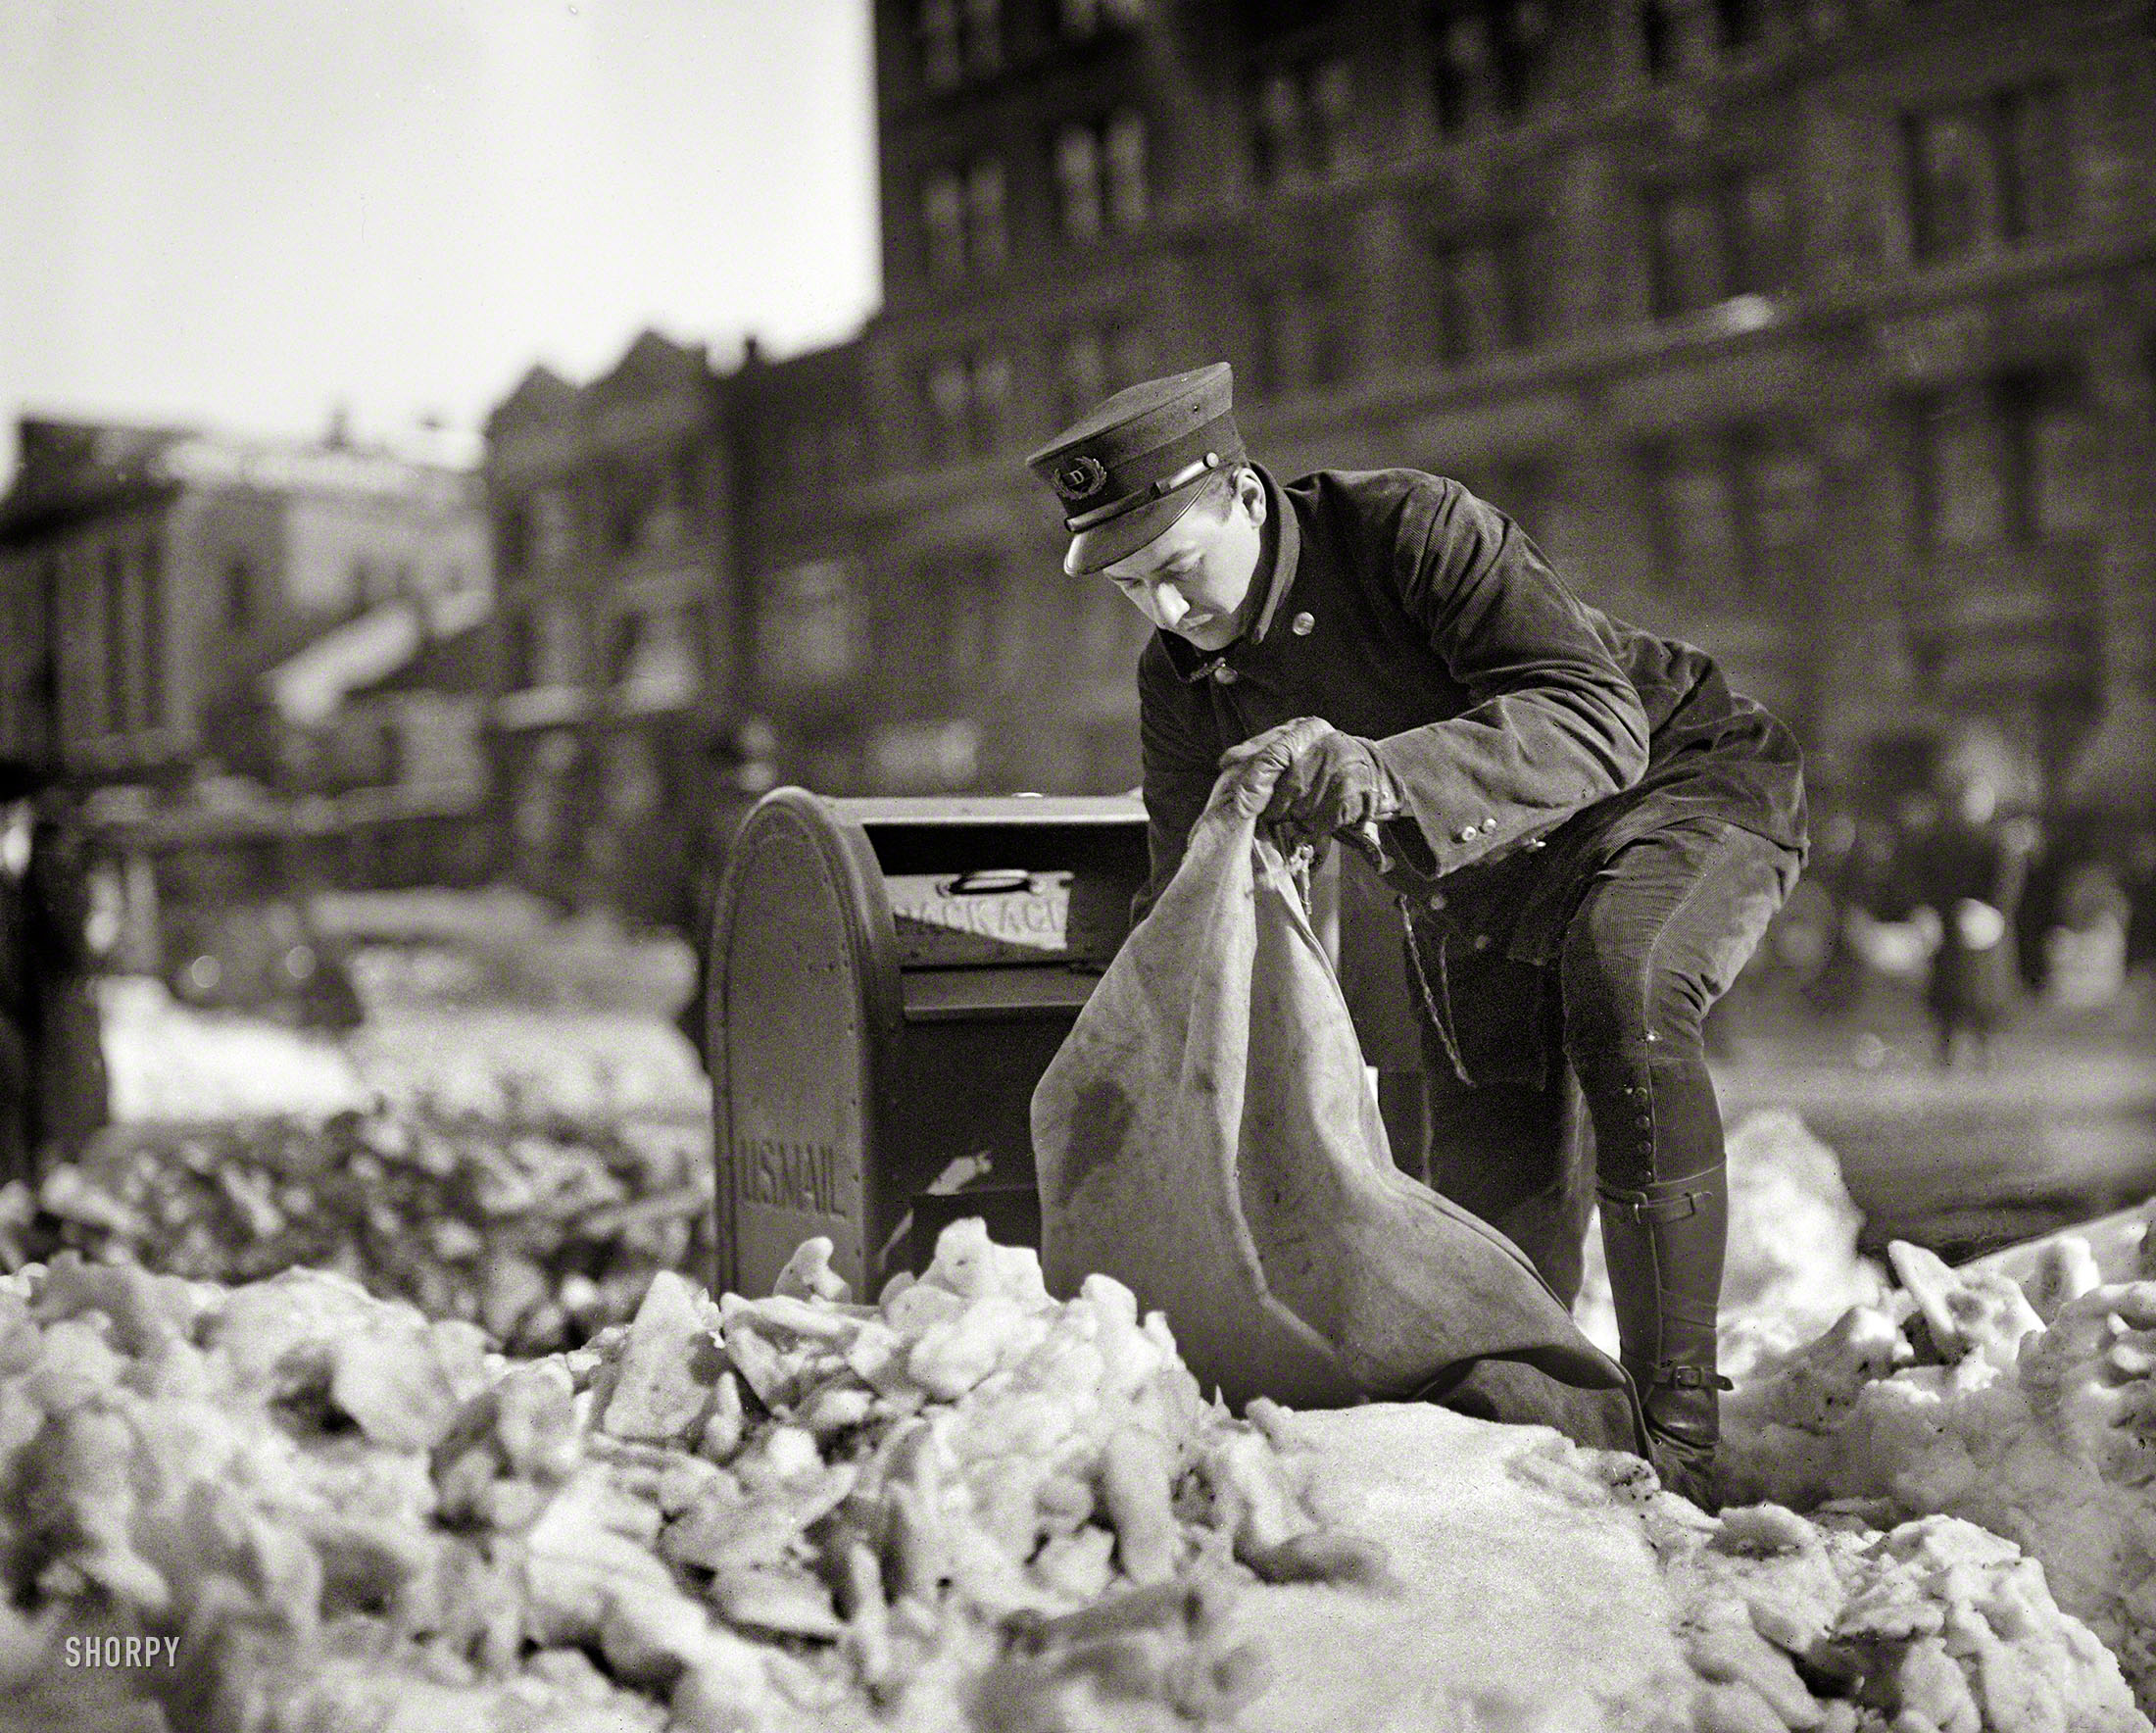 &nbsp; &nbsp; &nbsp; &nbsp; Neither snow nor rain nor heat nor gloom of night stays these couriers from the swift completion of their appointed rounds.
January 1922. Washington, D.C. "Snow scenes after blizzard." When the mailbox is also an icebox. Harris & Ewing Collection glass negative. View full size.